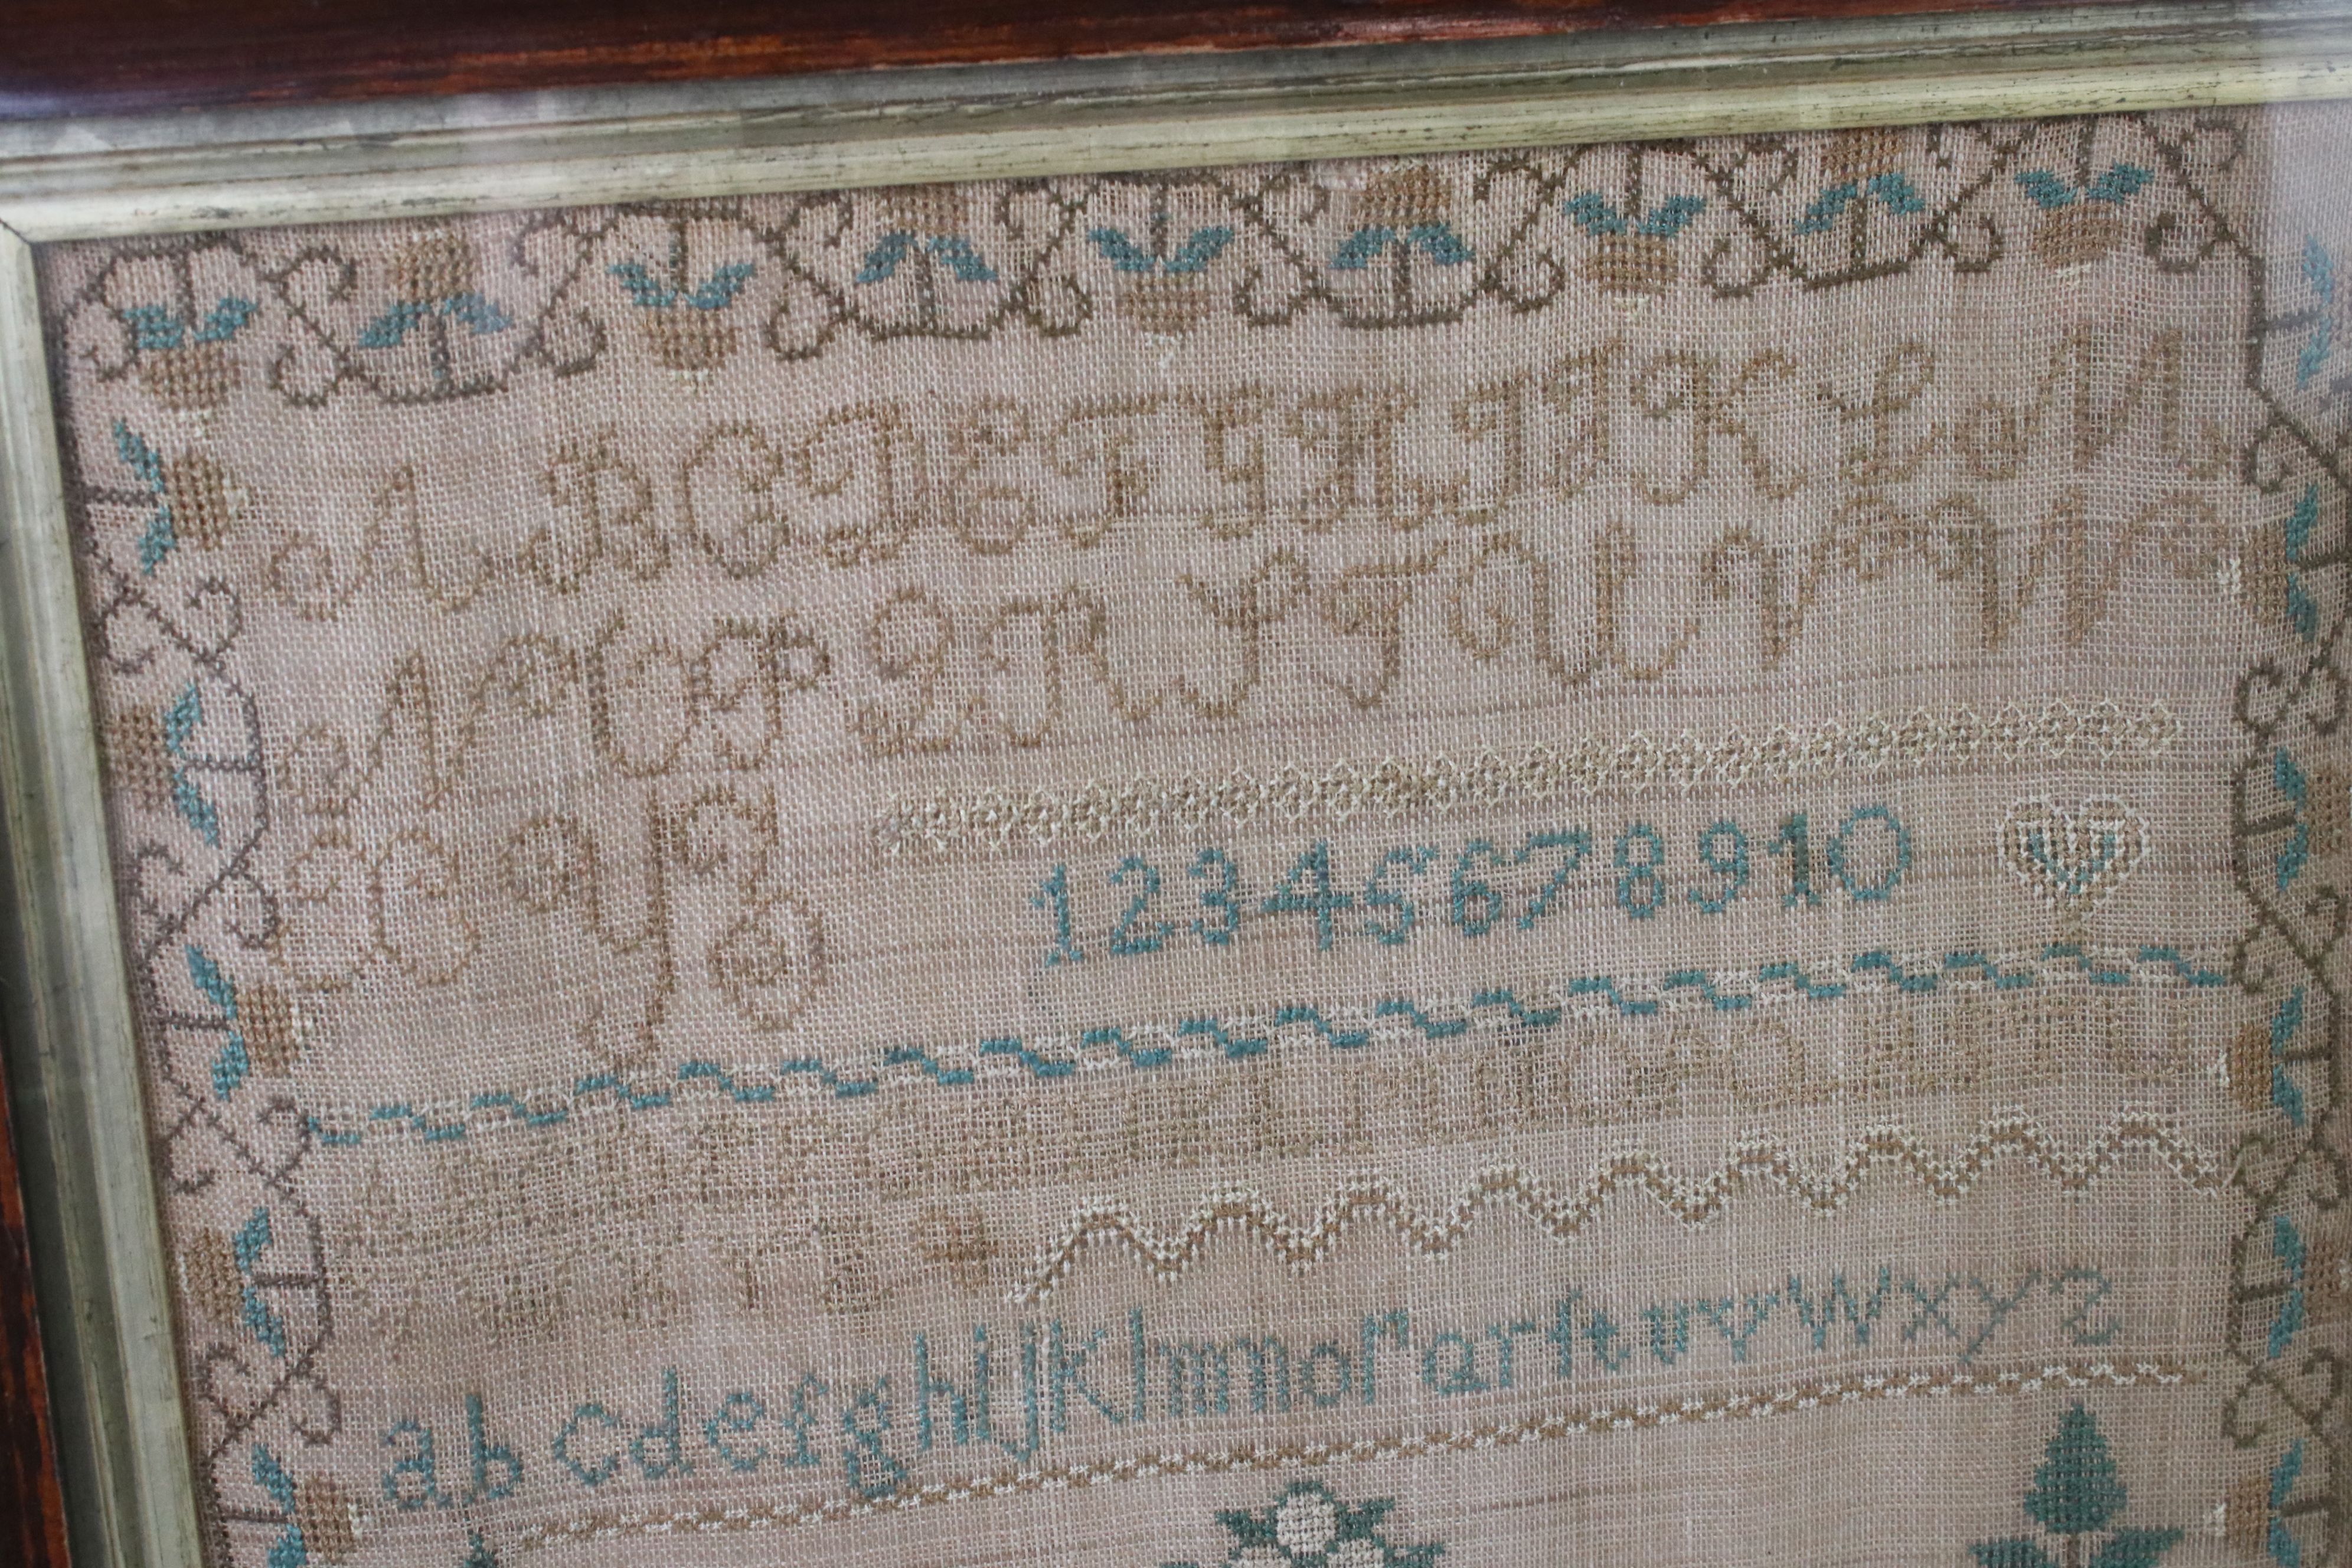 Early 19th century needlework sampler by Mary Bank, dated June 16th 1826, featuring a house, - Image 2 of 7